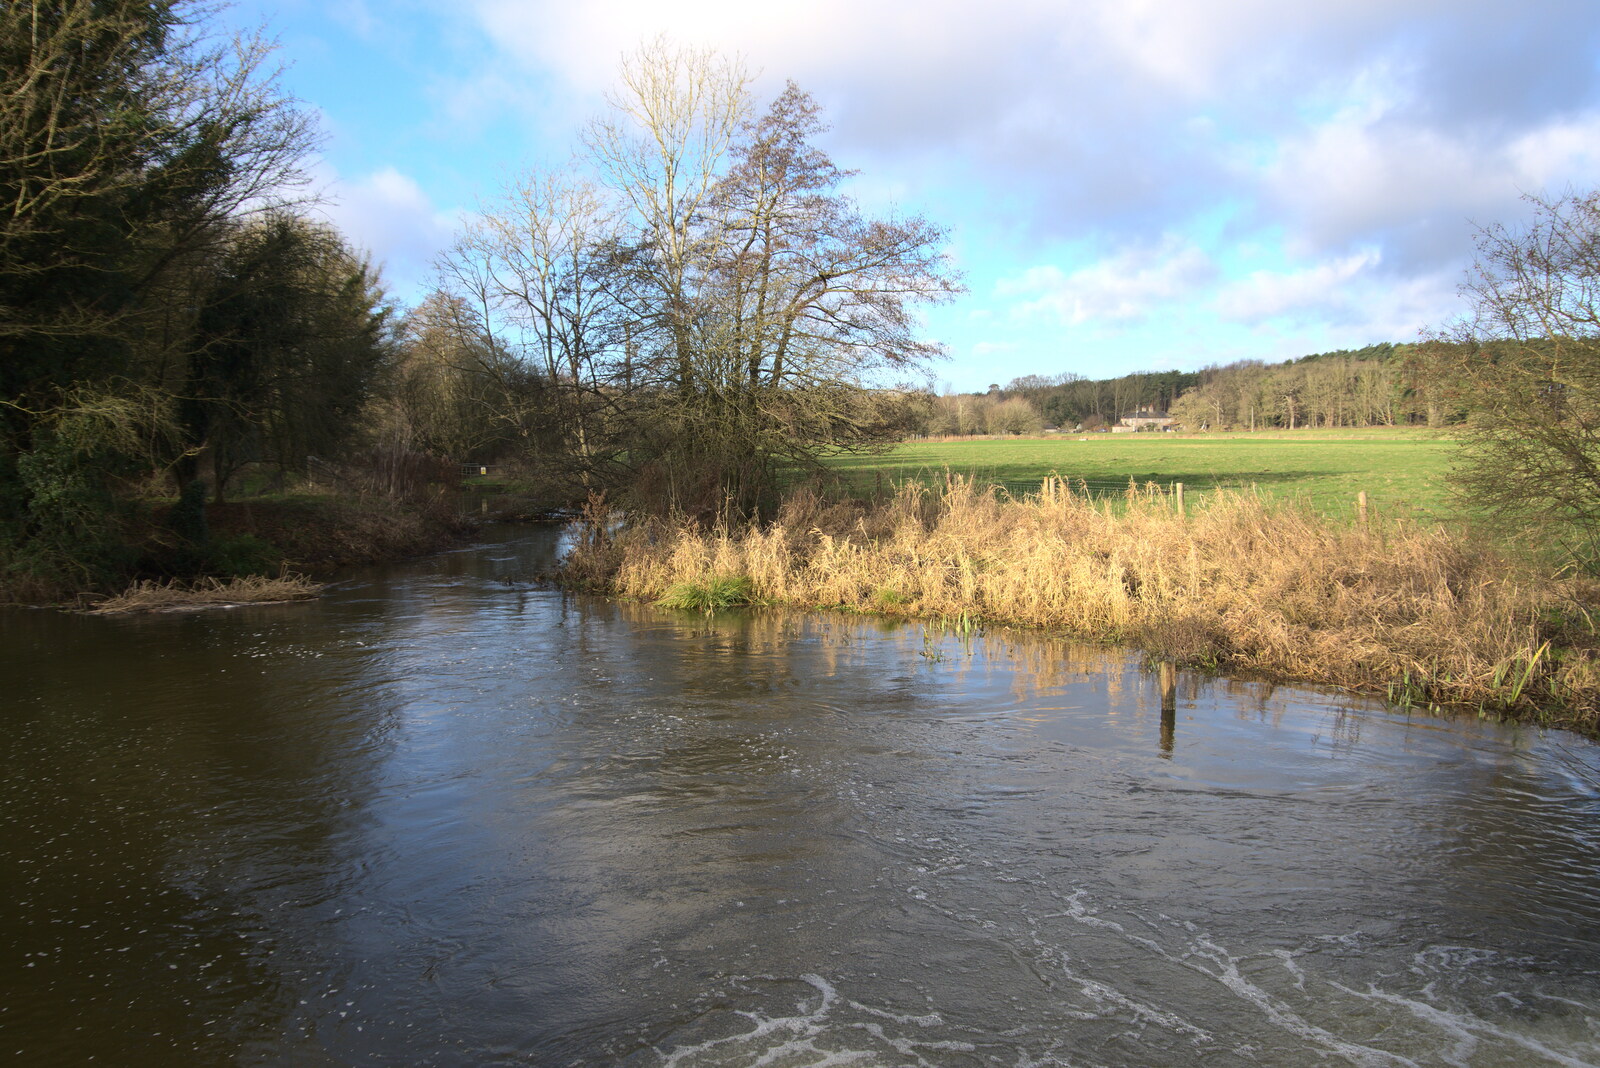 The river and pond by the car park from A Walk Around Knettishall Heath, Thetford, Norfolk - 2nd January 2022